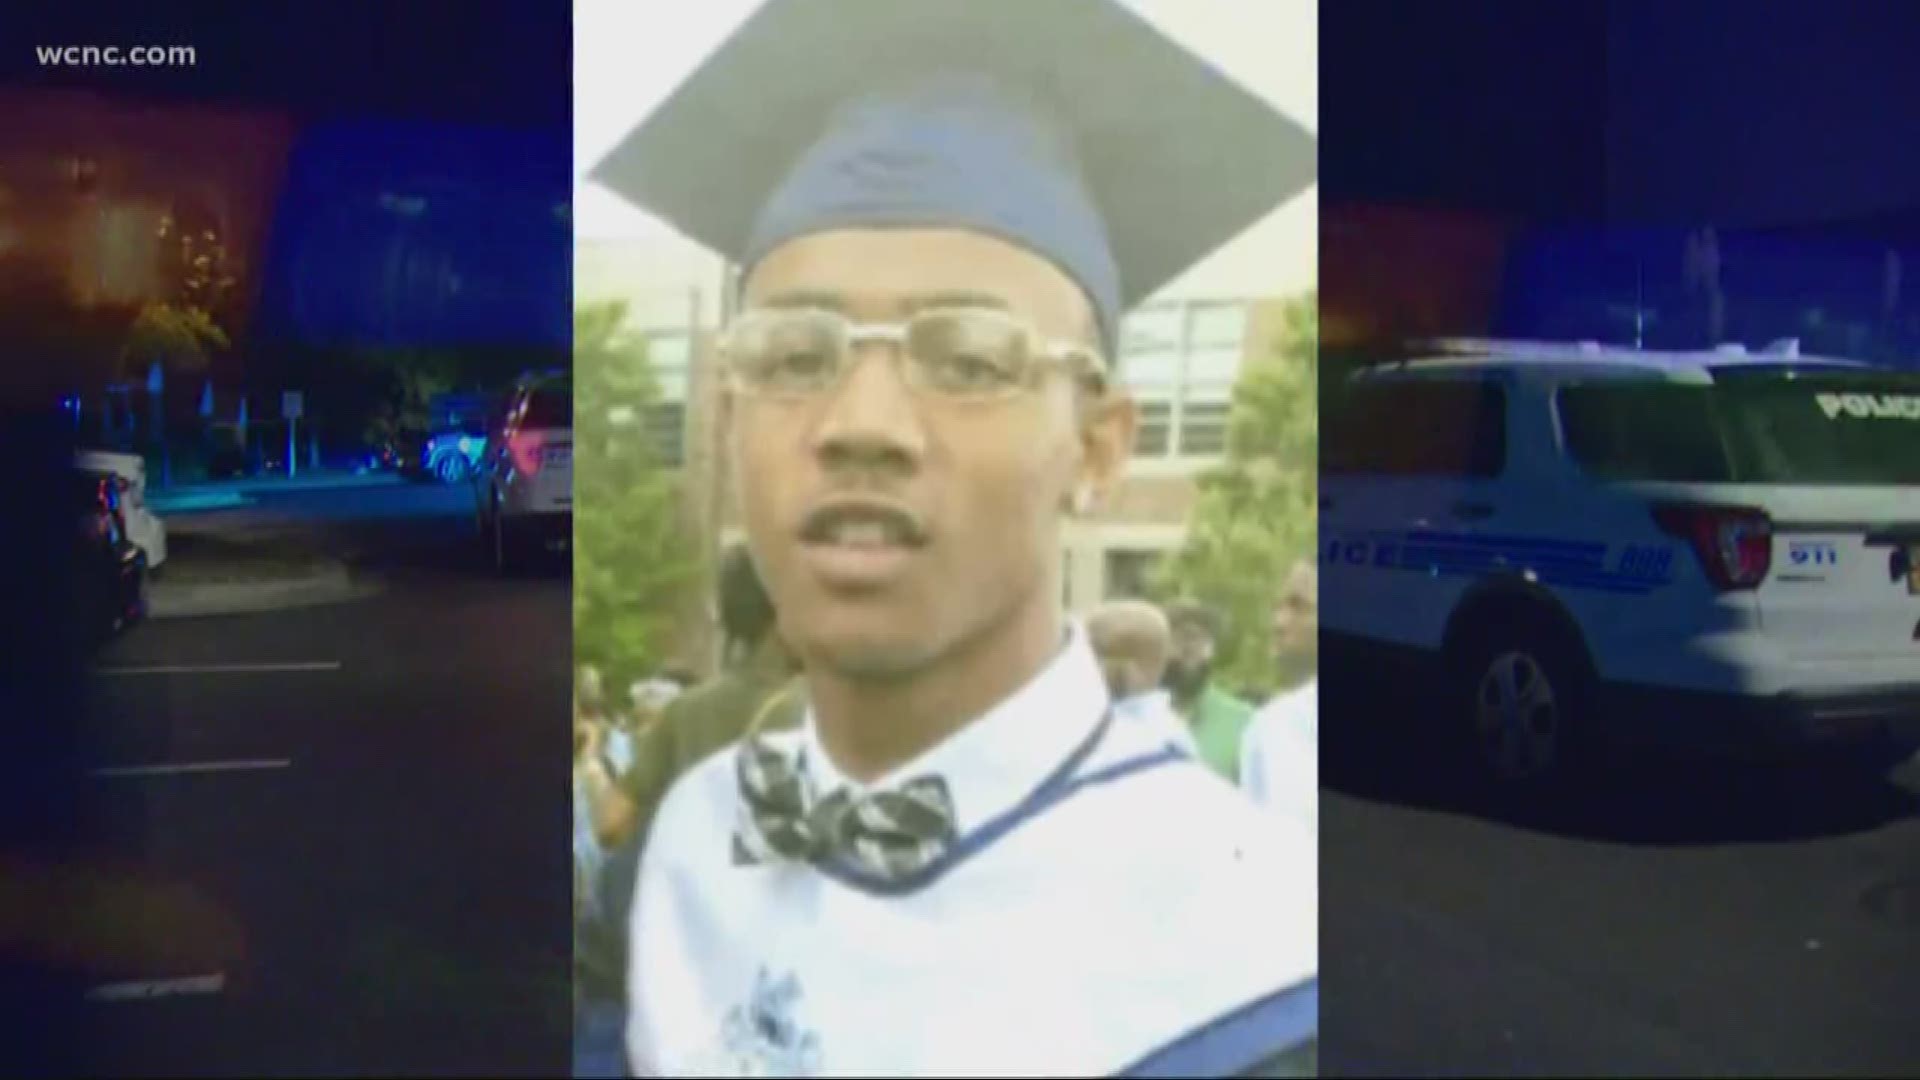 19-year-old Christian Malik Estes was shot and killed at a college party on August 31. Three other people were shot and rushed to the hospital with serious injuries.